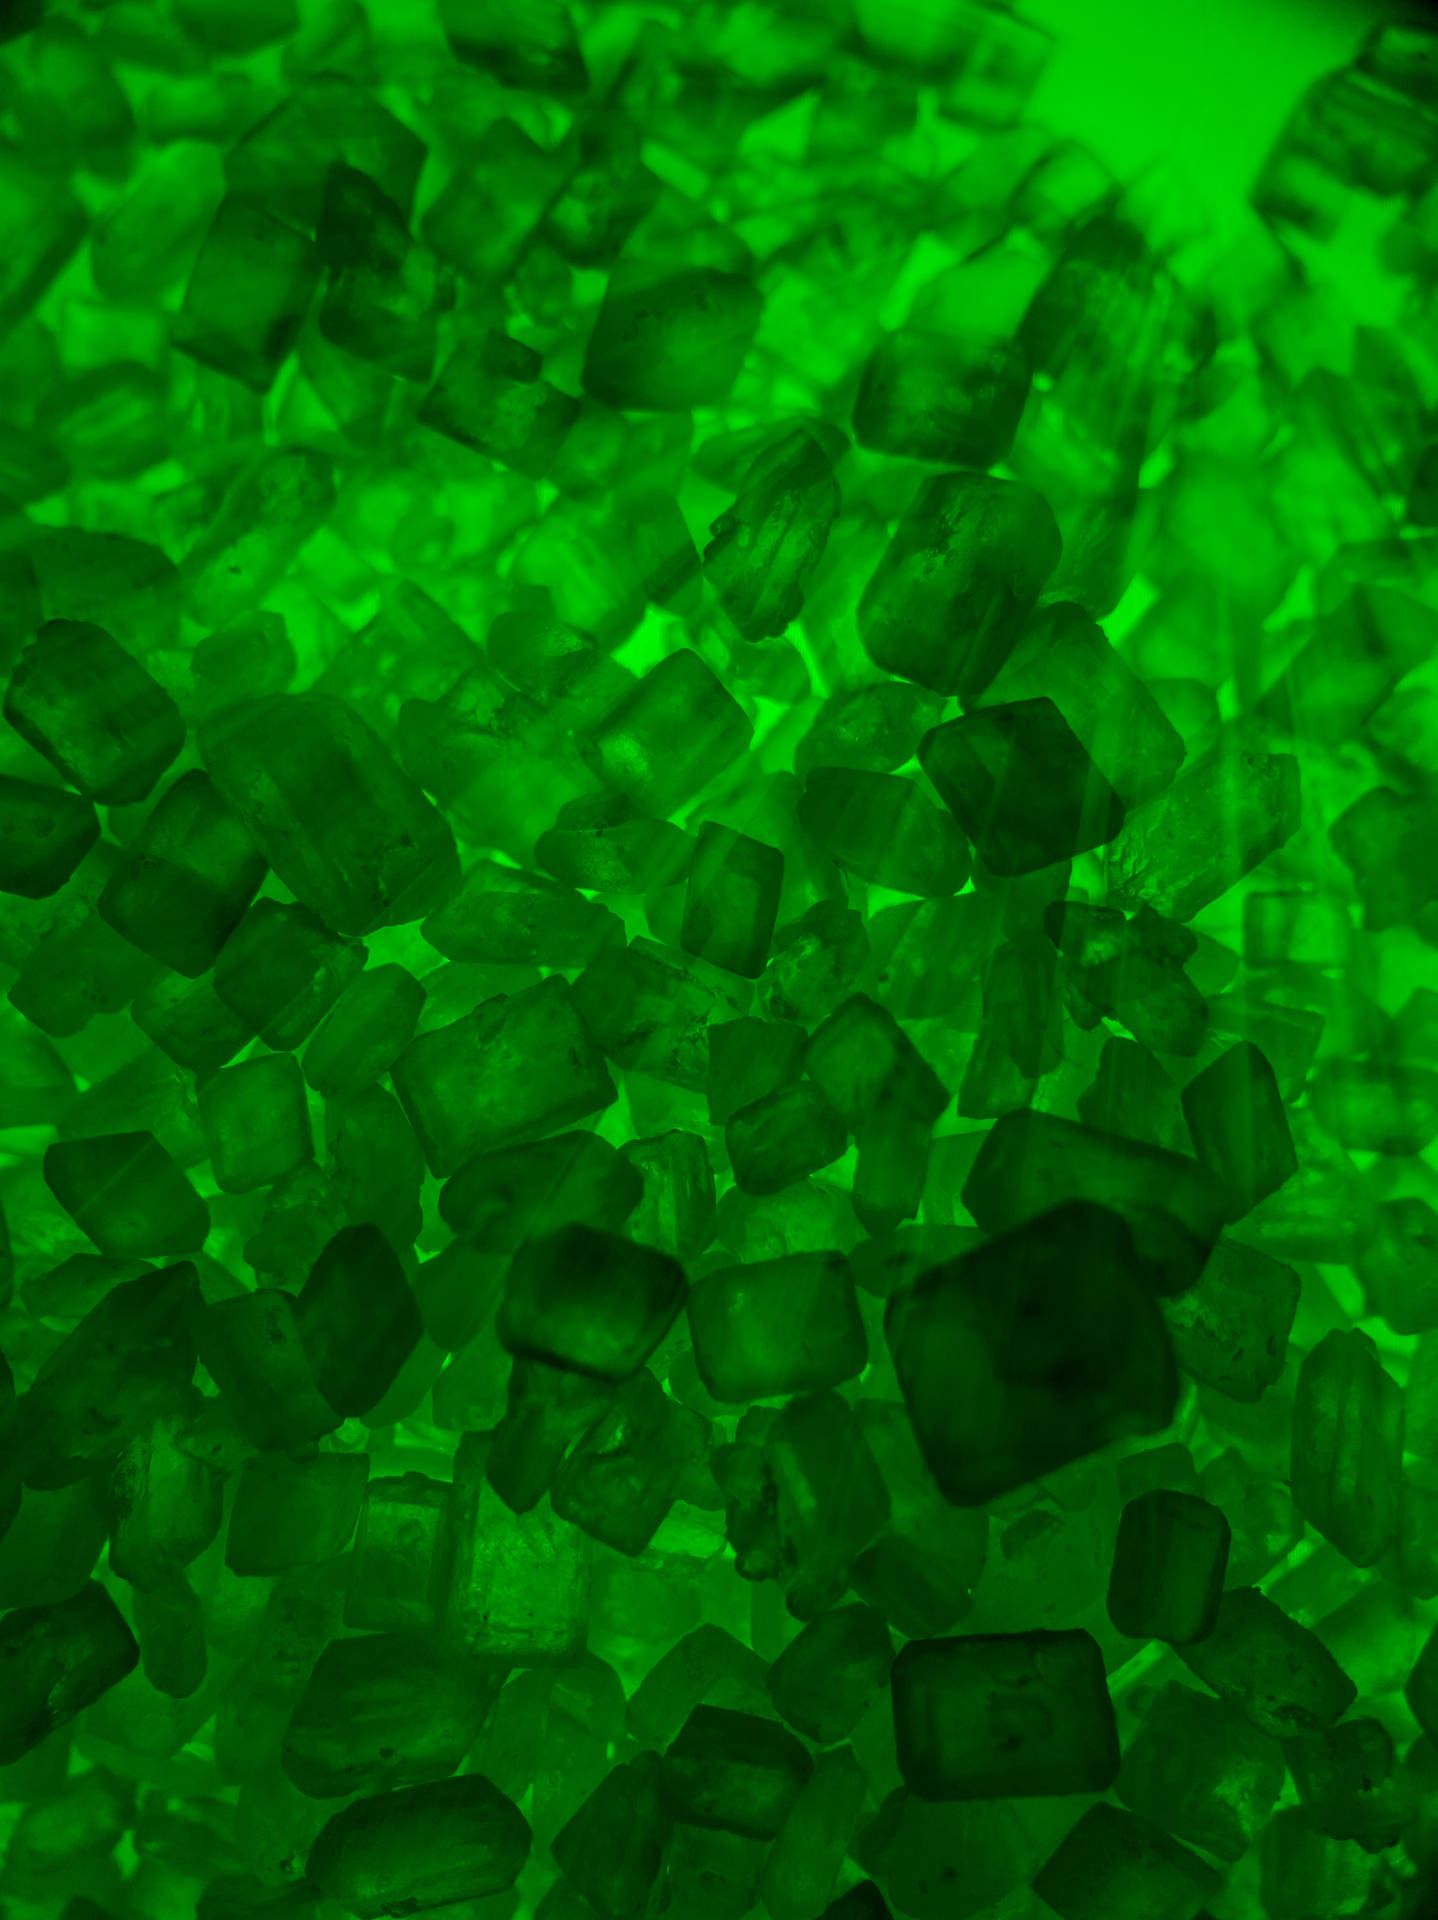 Crystal 3008X4016 Wallpaper and Background Image